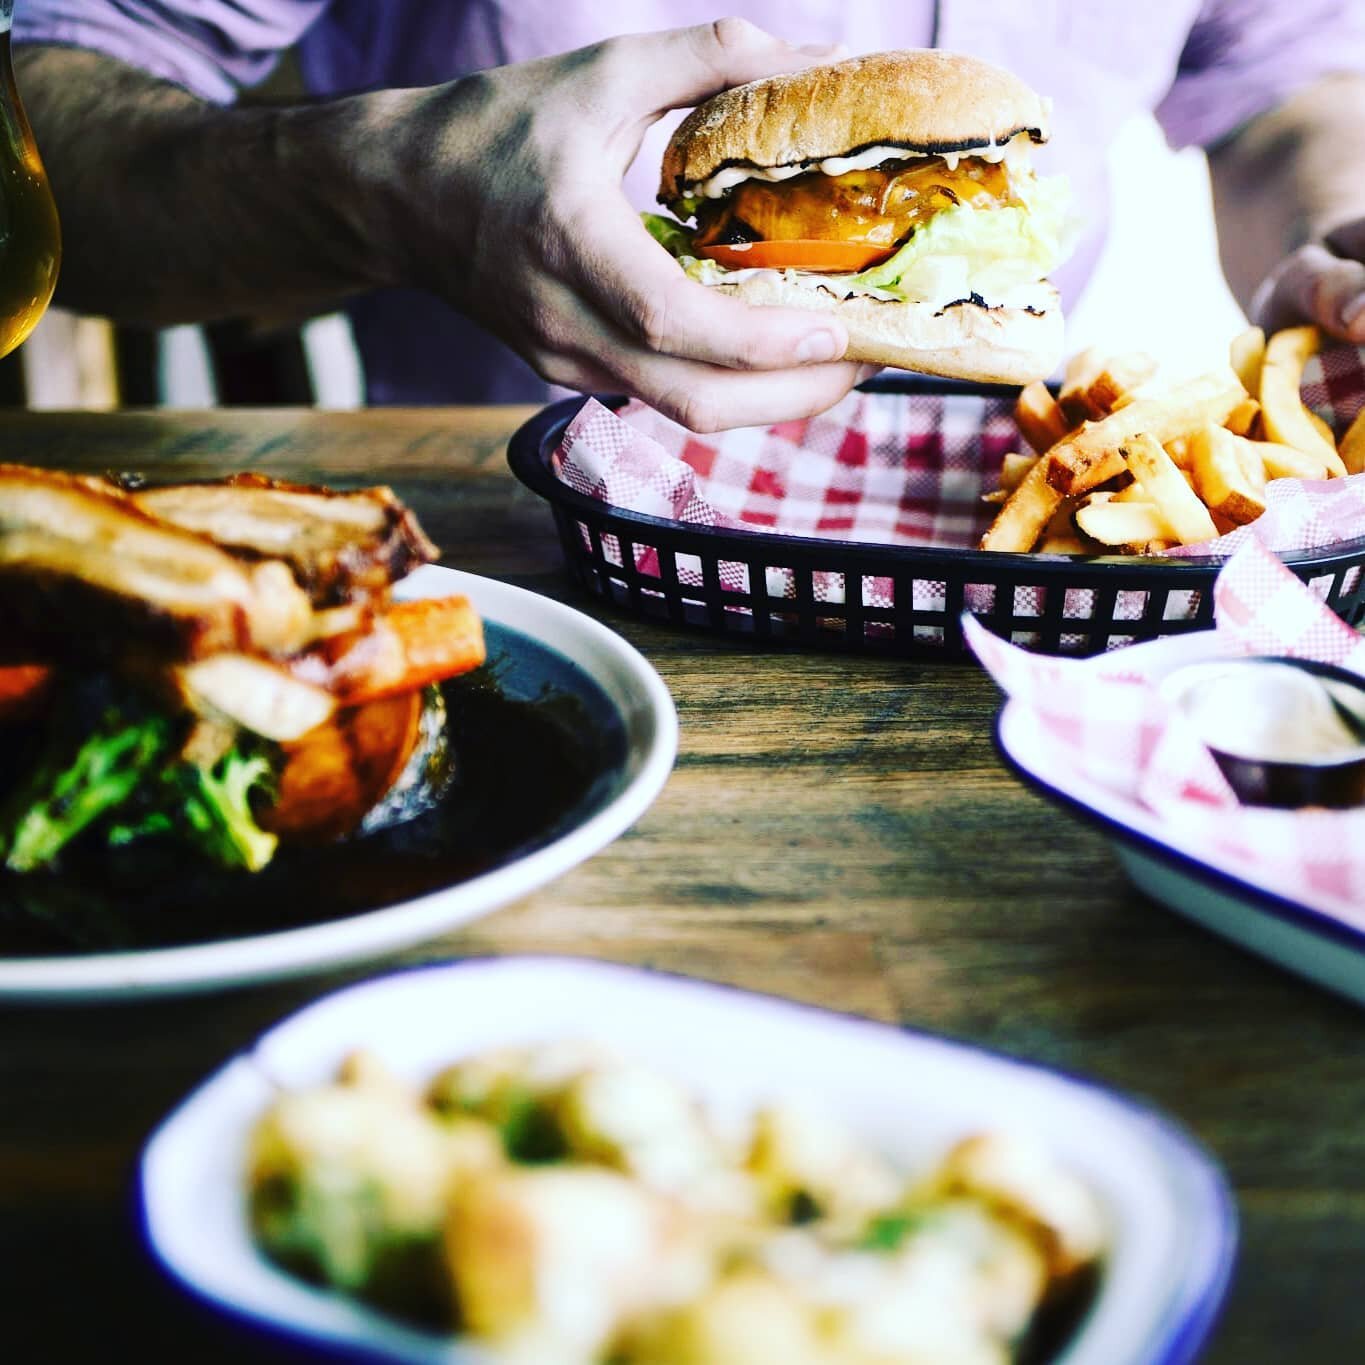 Righto, it's a burger kinda day.

Who does the best Burgers in the Sutherland Shire?